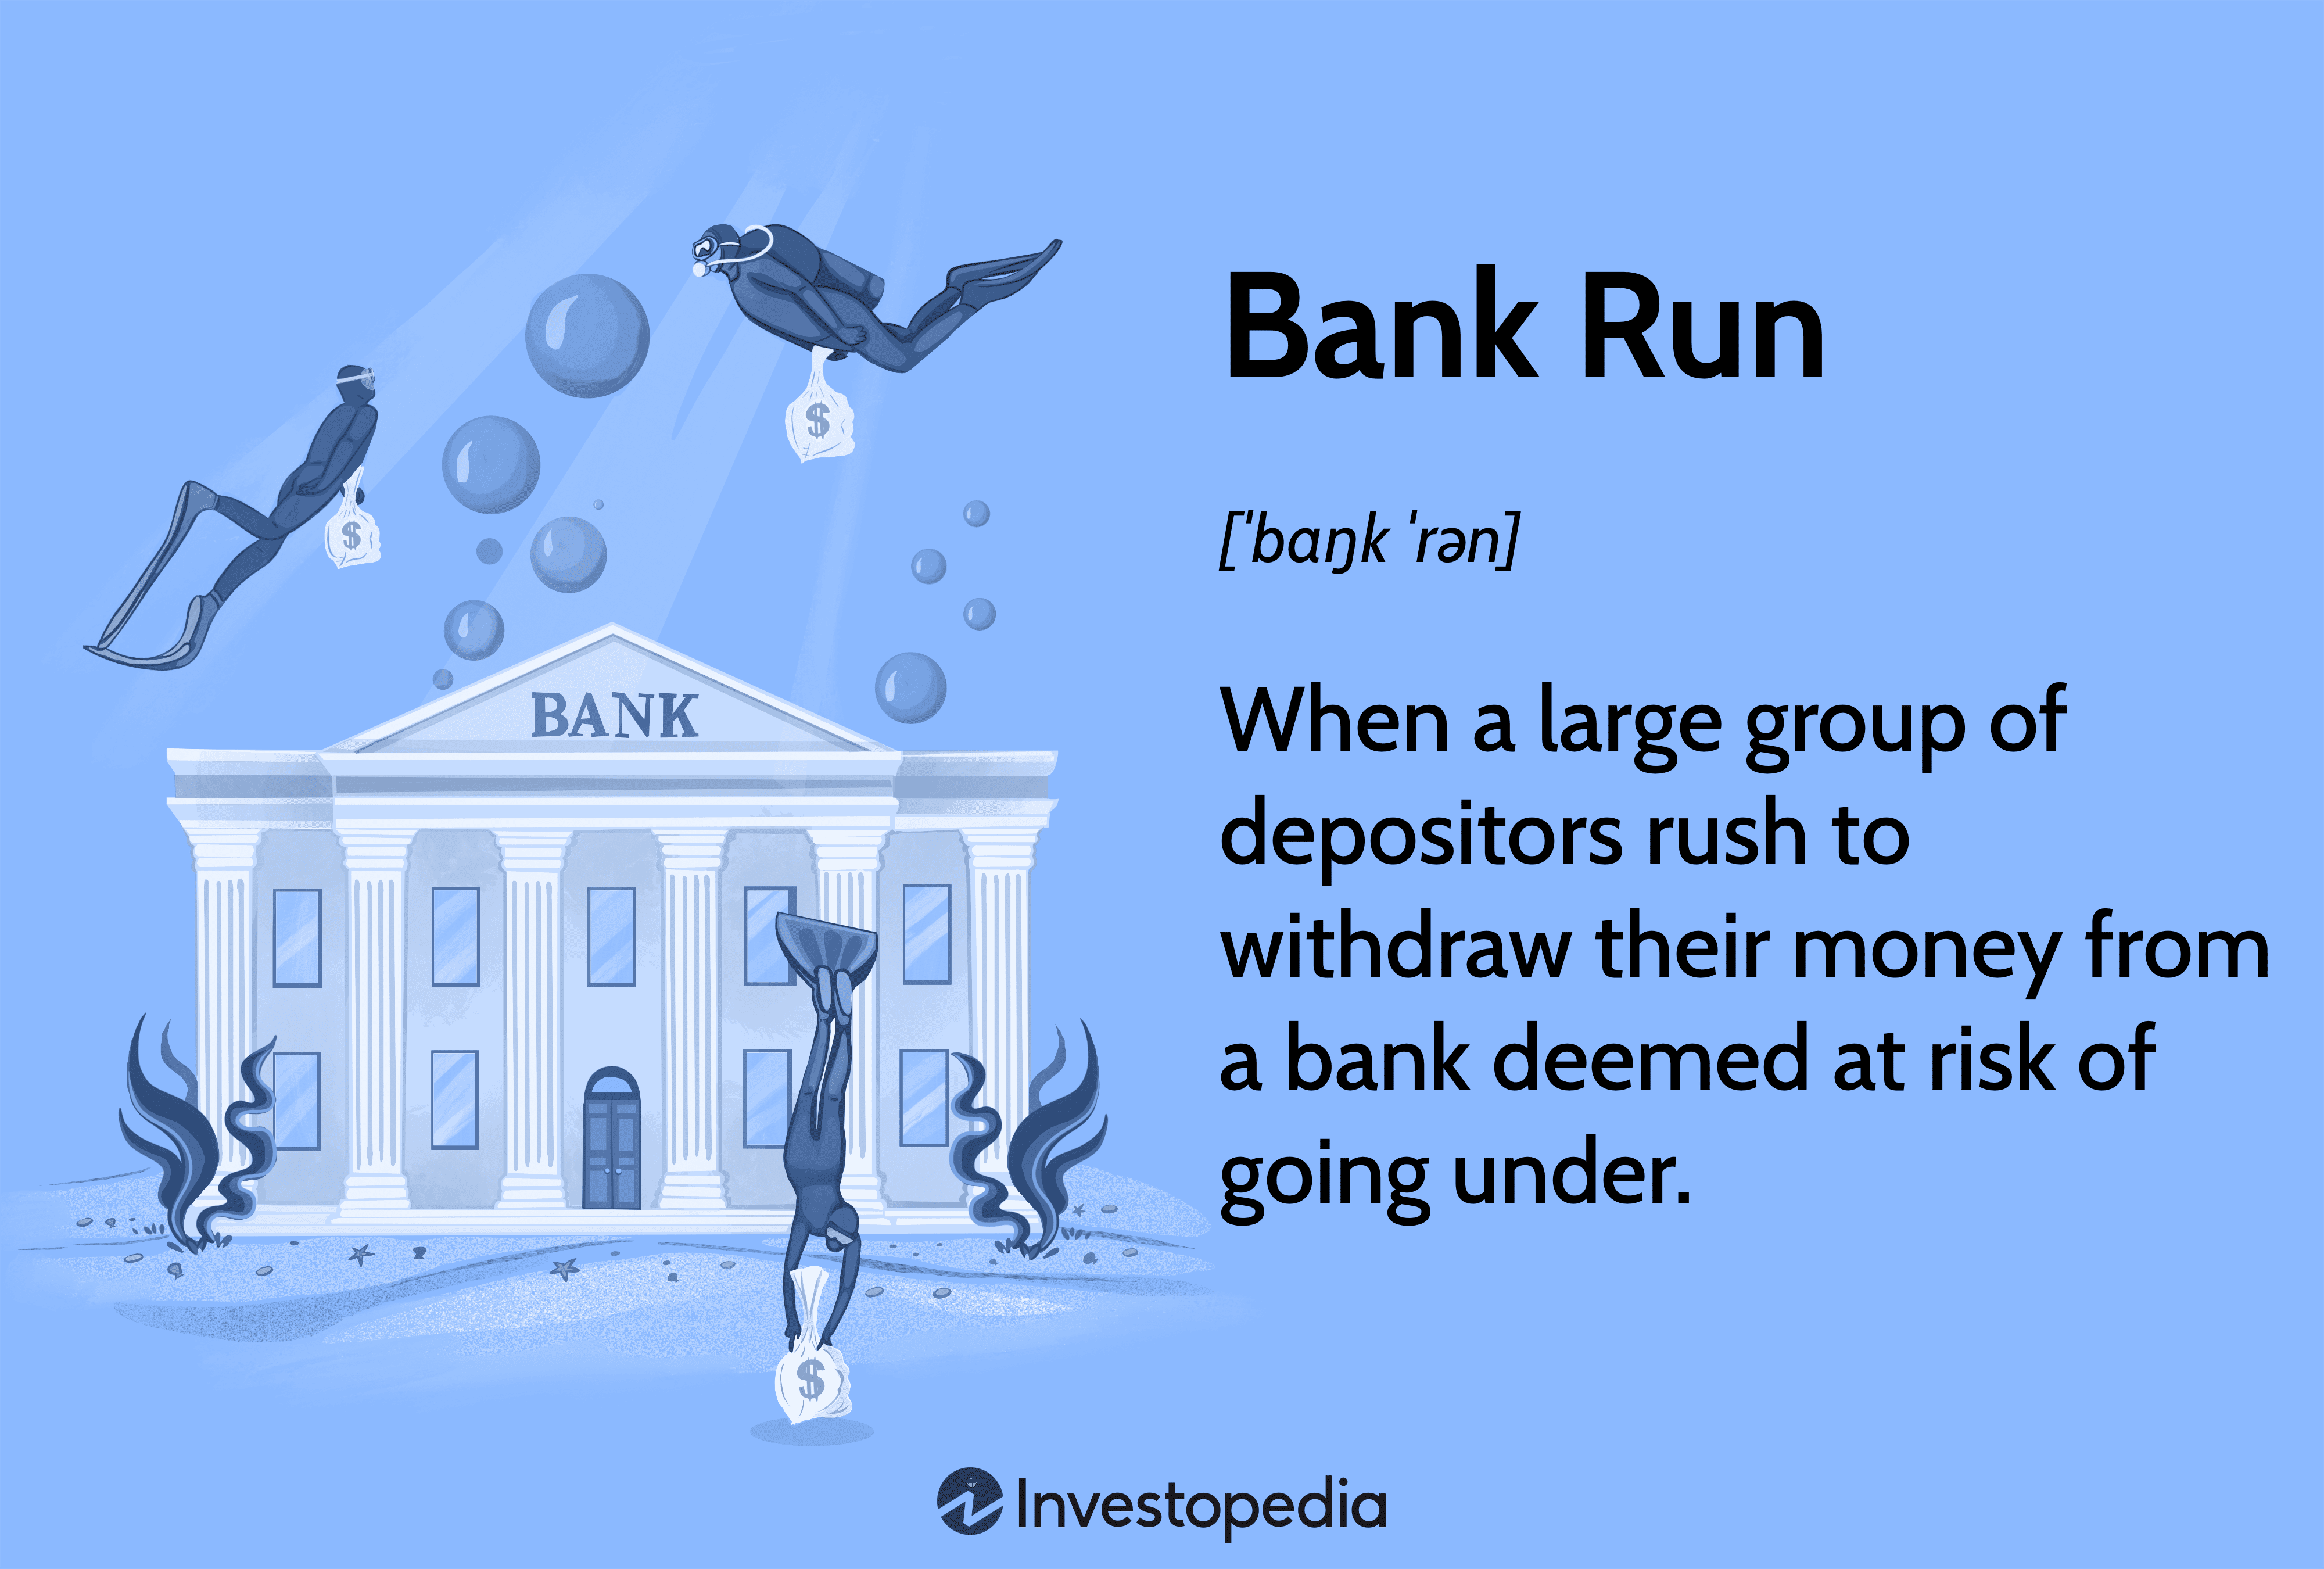 Bank Run: When a large group of depositors rush to withdraw their money from a bank deemed at risk of going under.